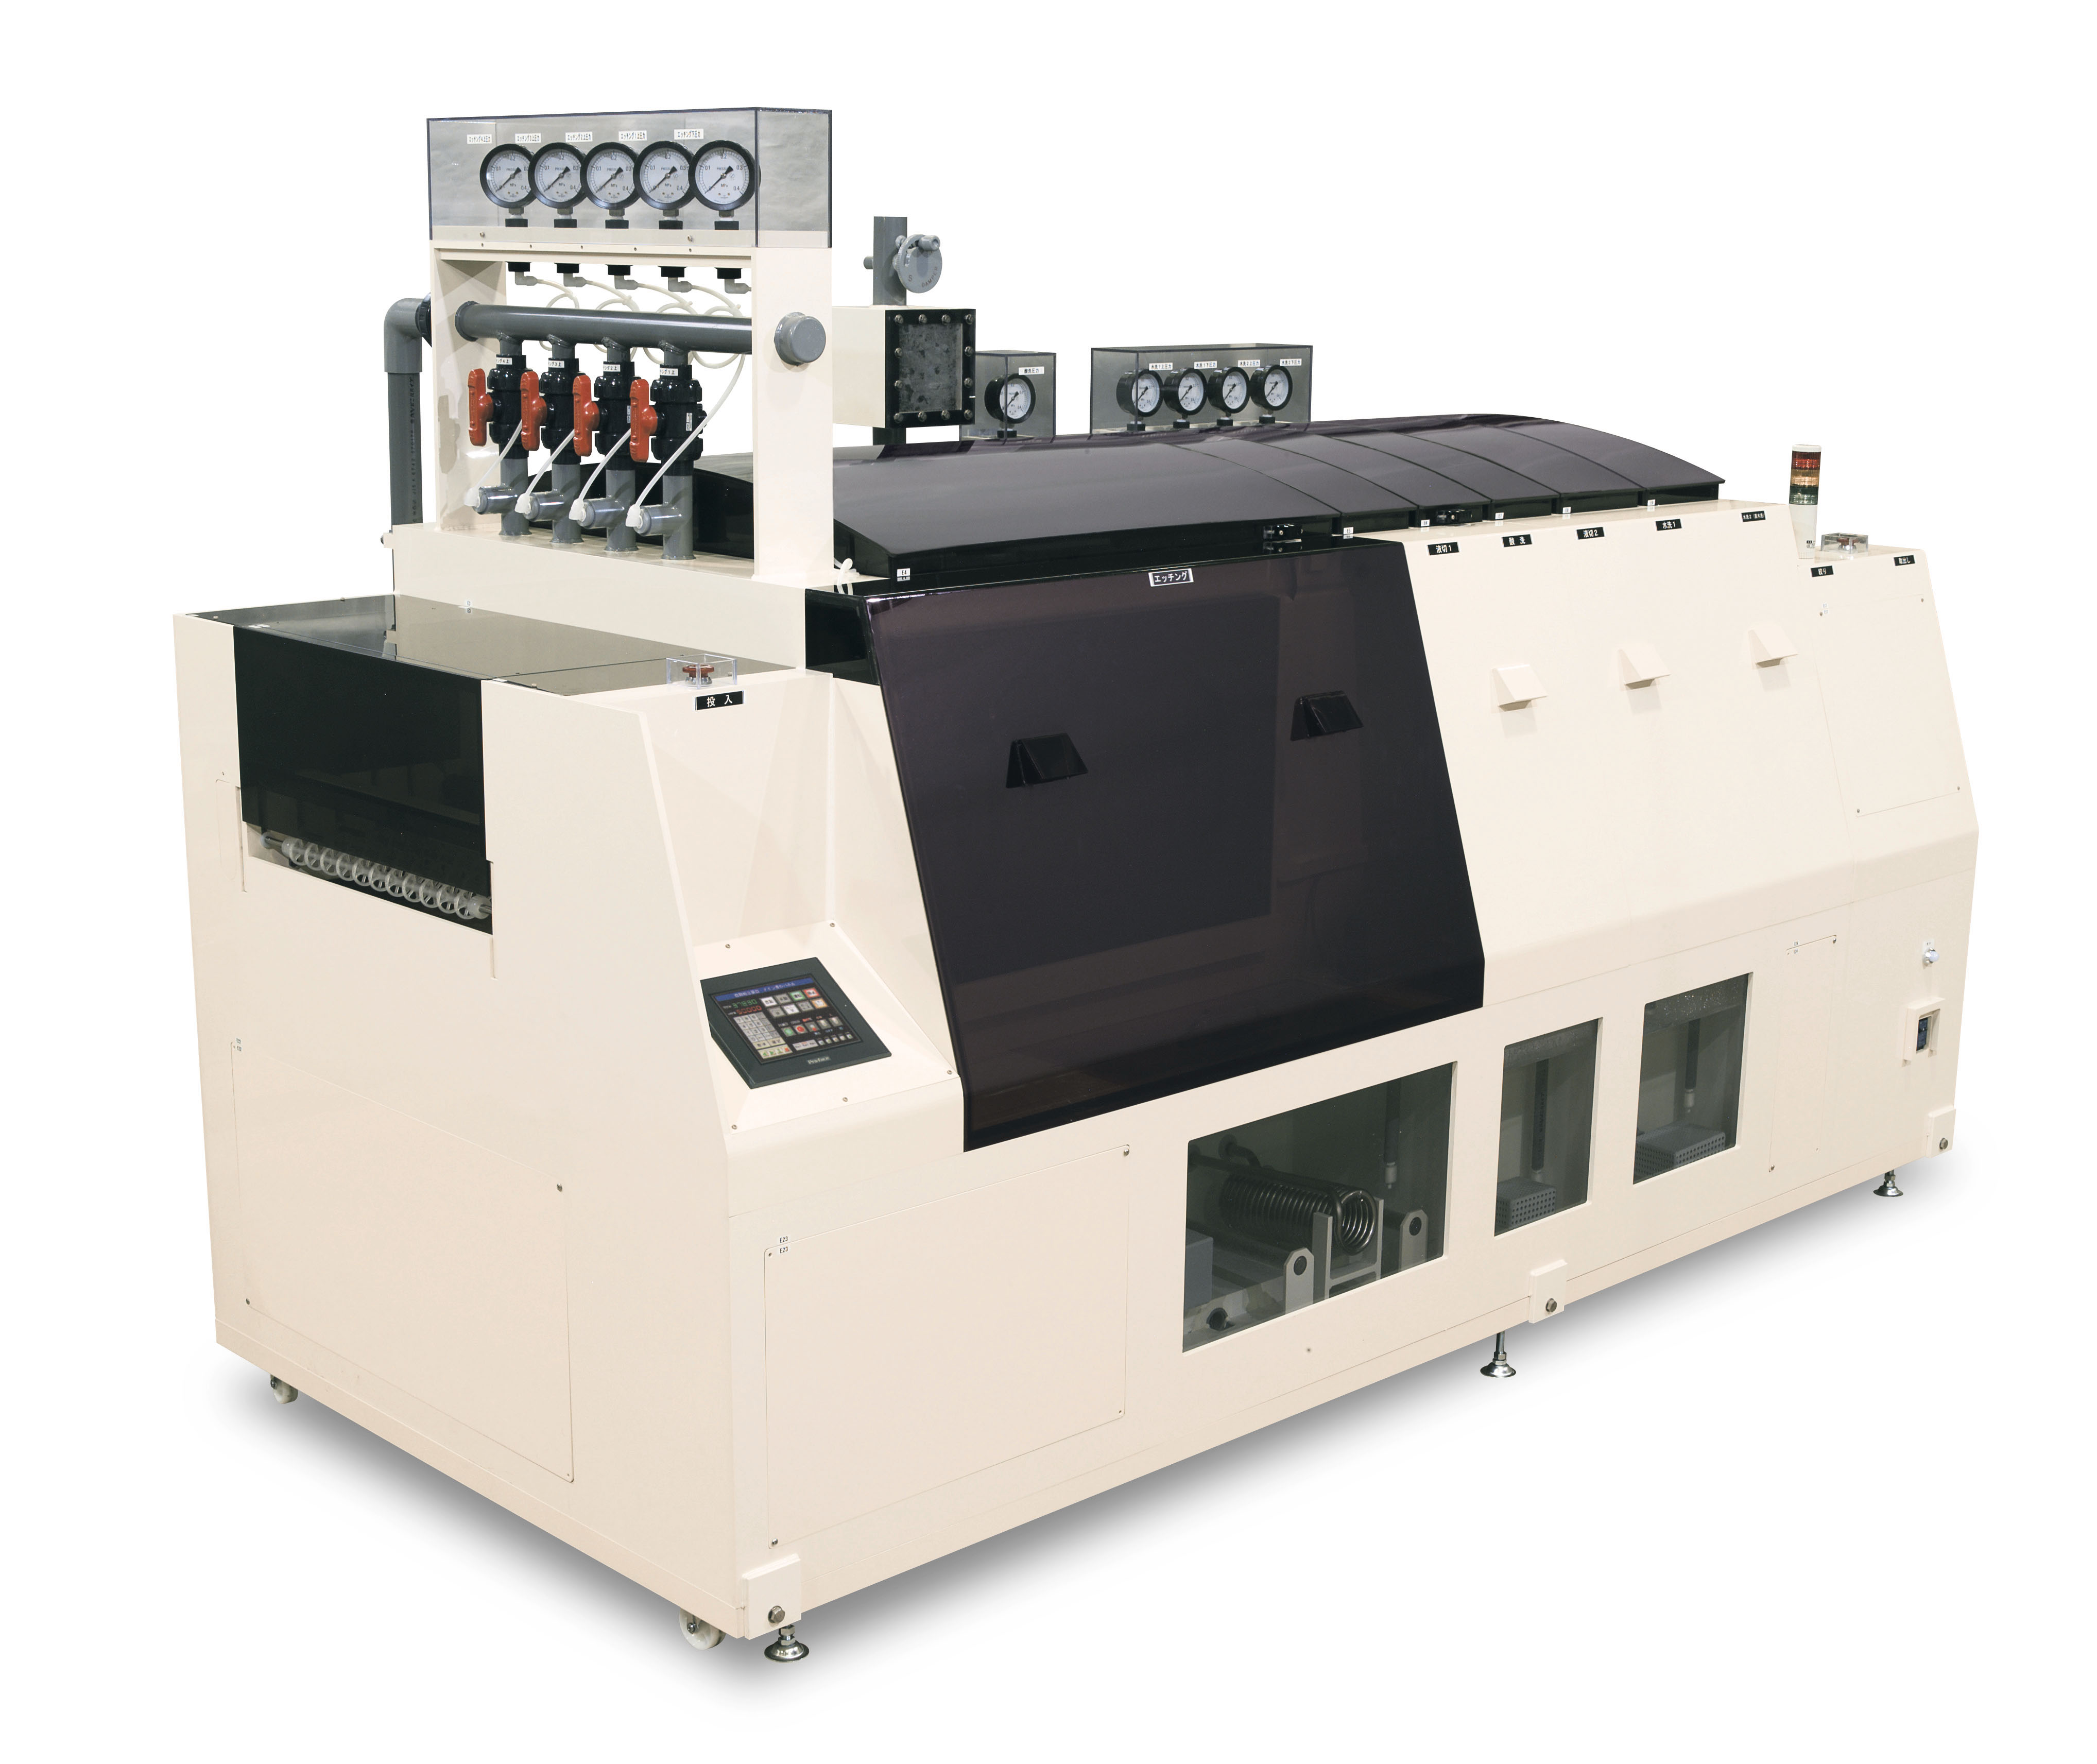 Compact machines for research and development